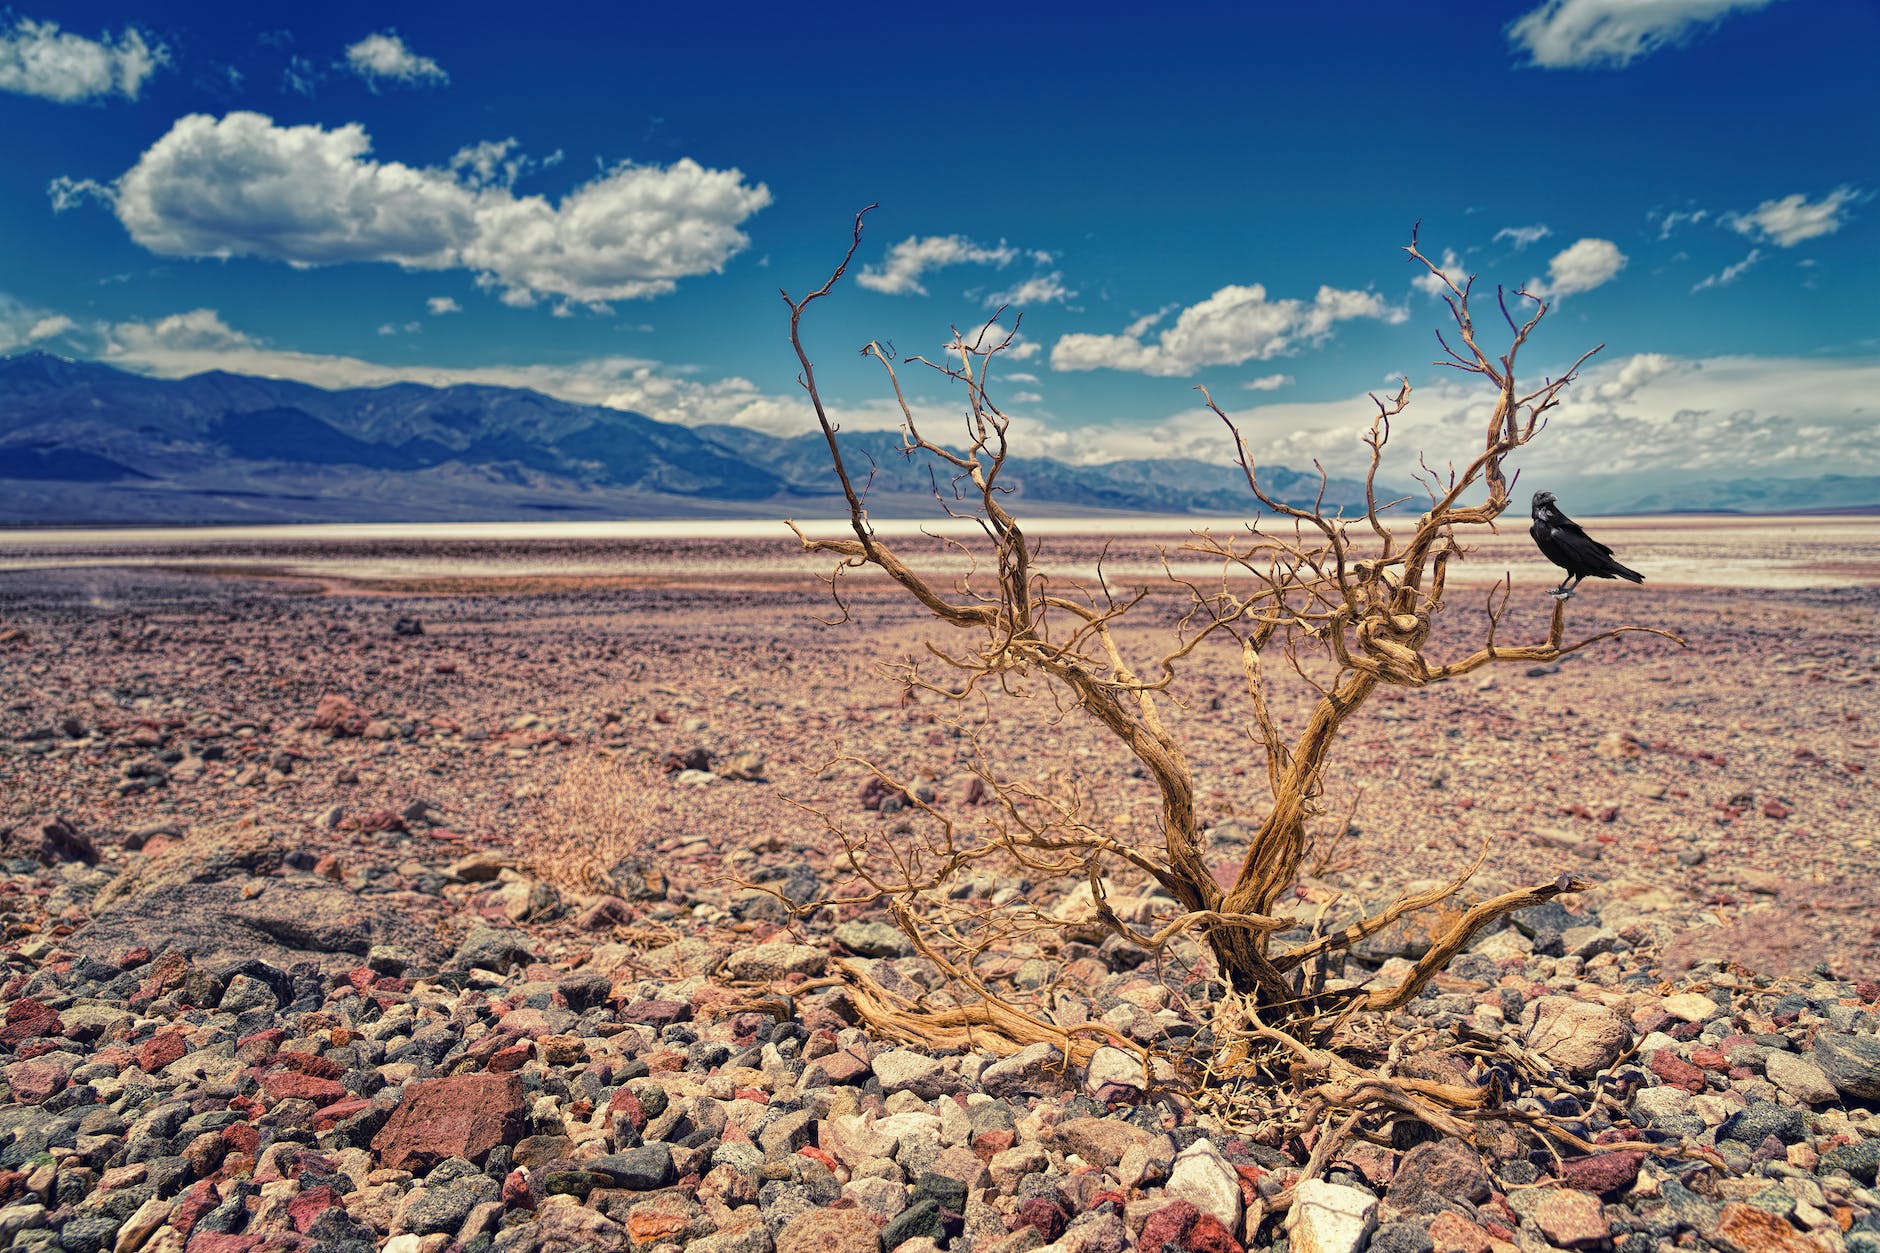 Droughts in the US: Understanding the Impacts, Challenges, and Solutions